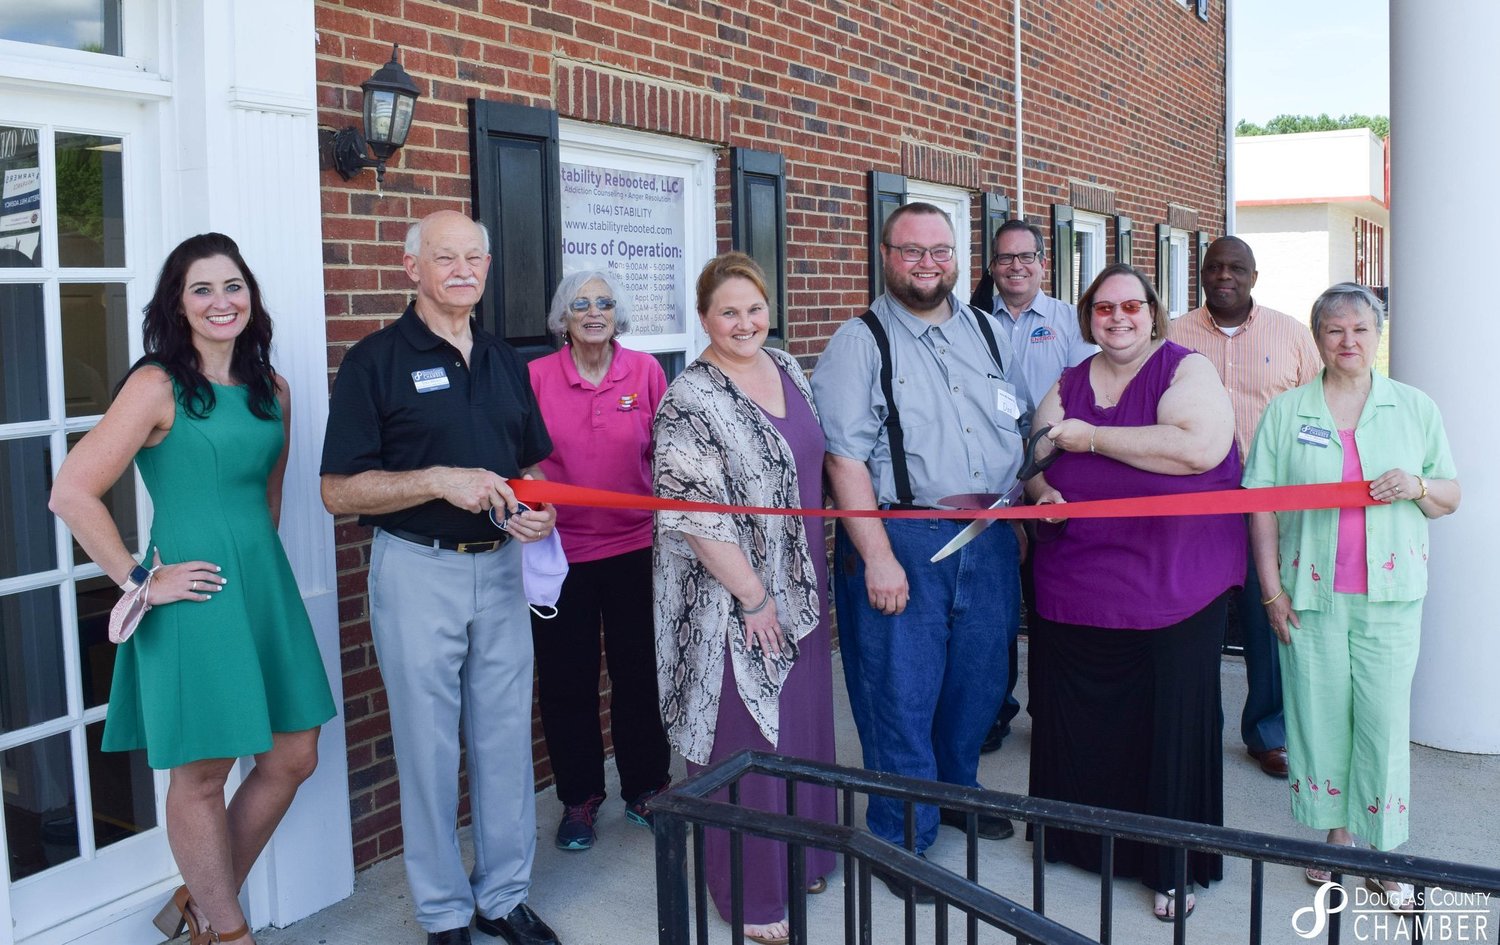 Gallery Photo of We are proud members of the Douglas County Chamber of Commerce.  This is our Ribbon Cutting Ceremony.